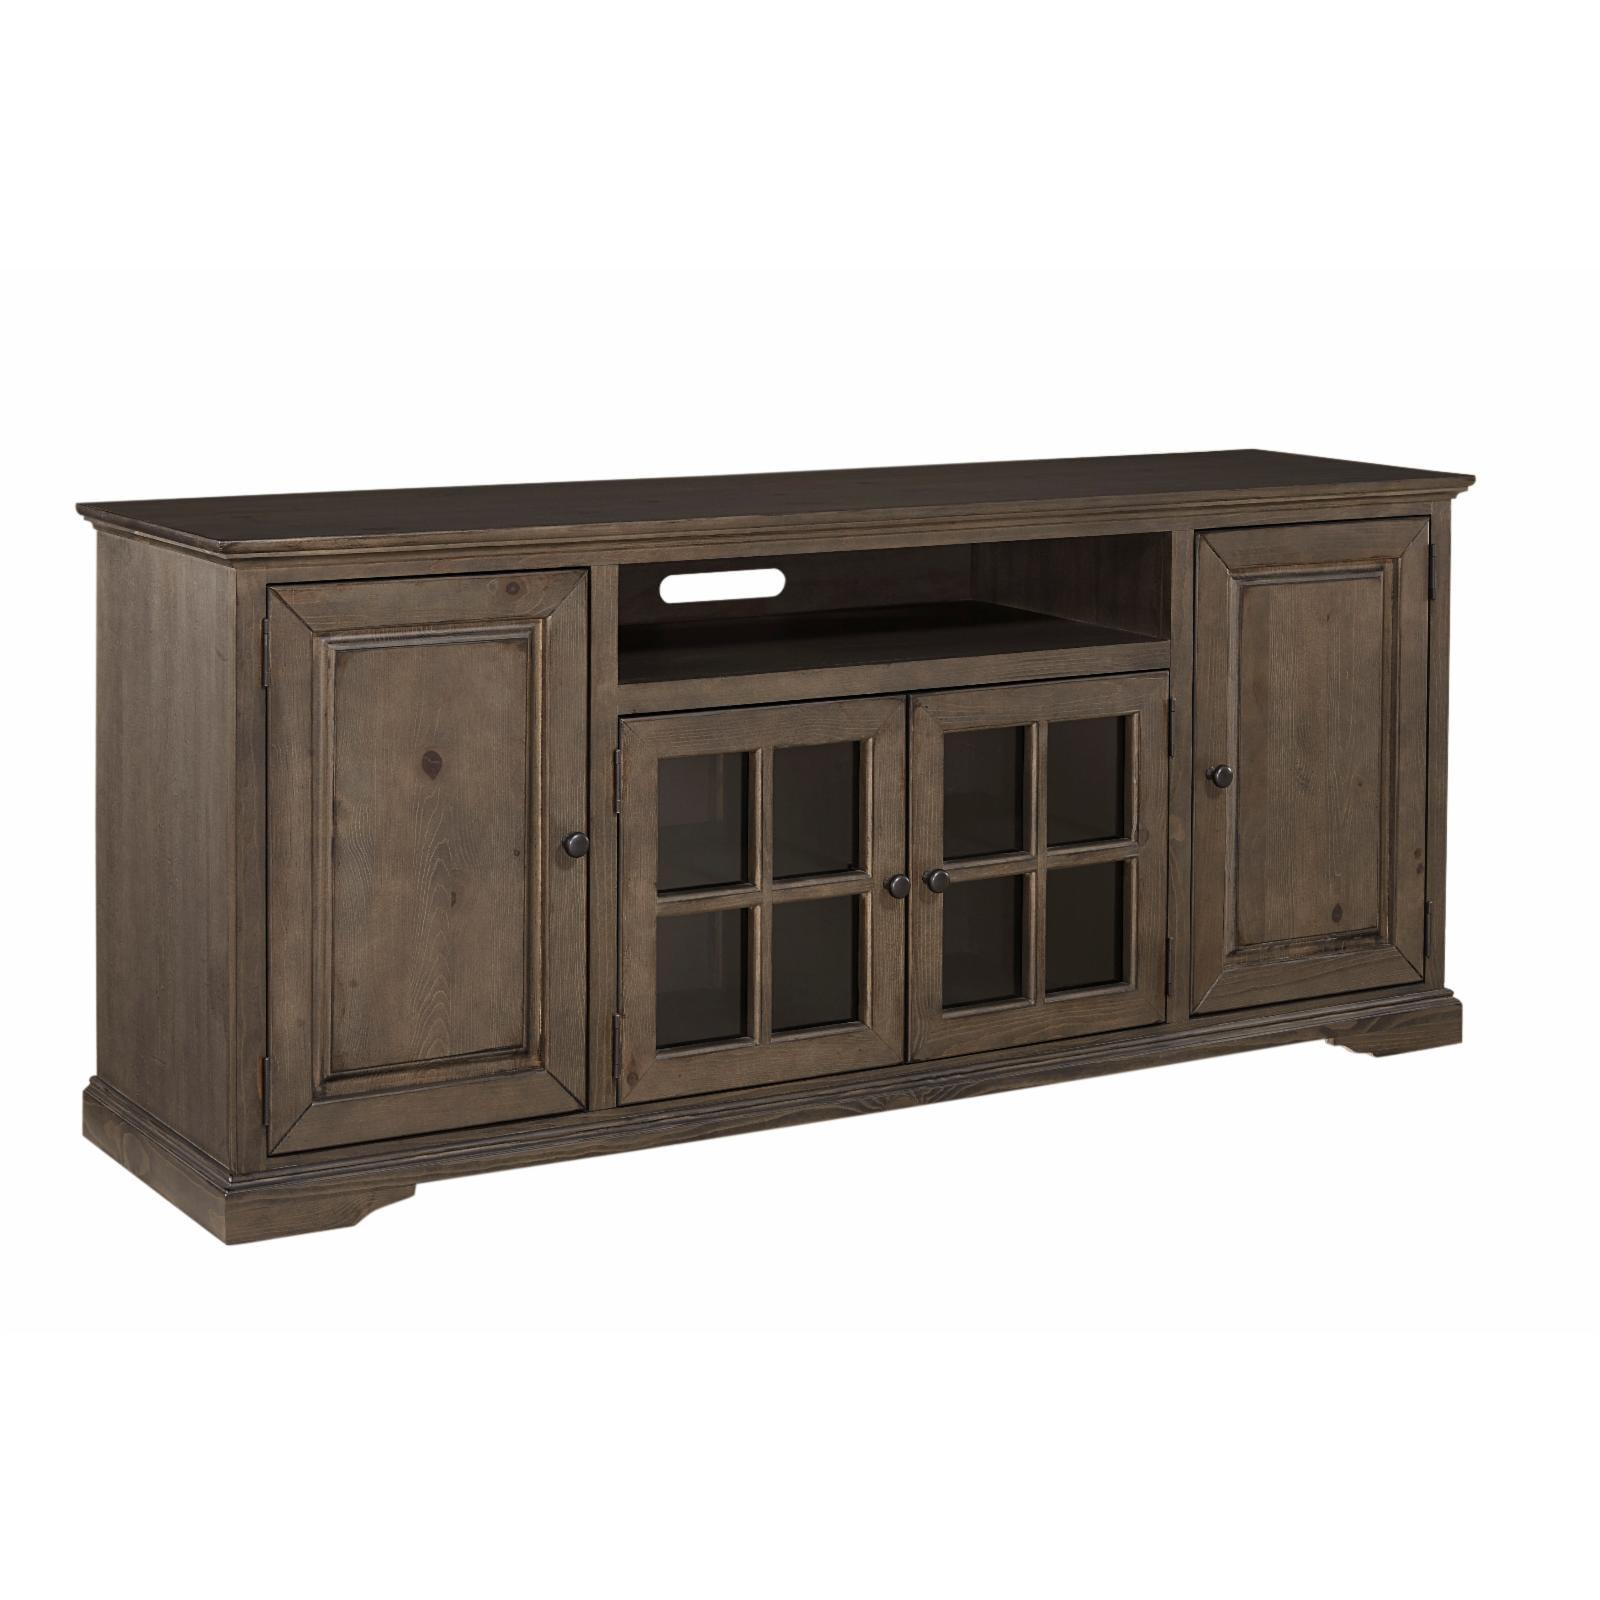 Hamilton Storm Gray 74" Traditional Console with Glass & Wood Doors